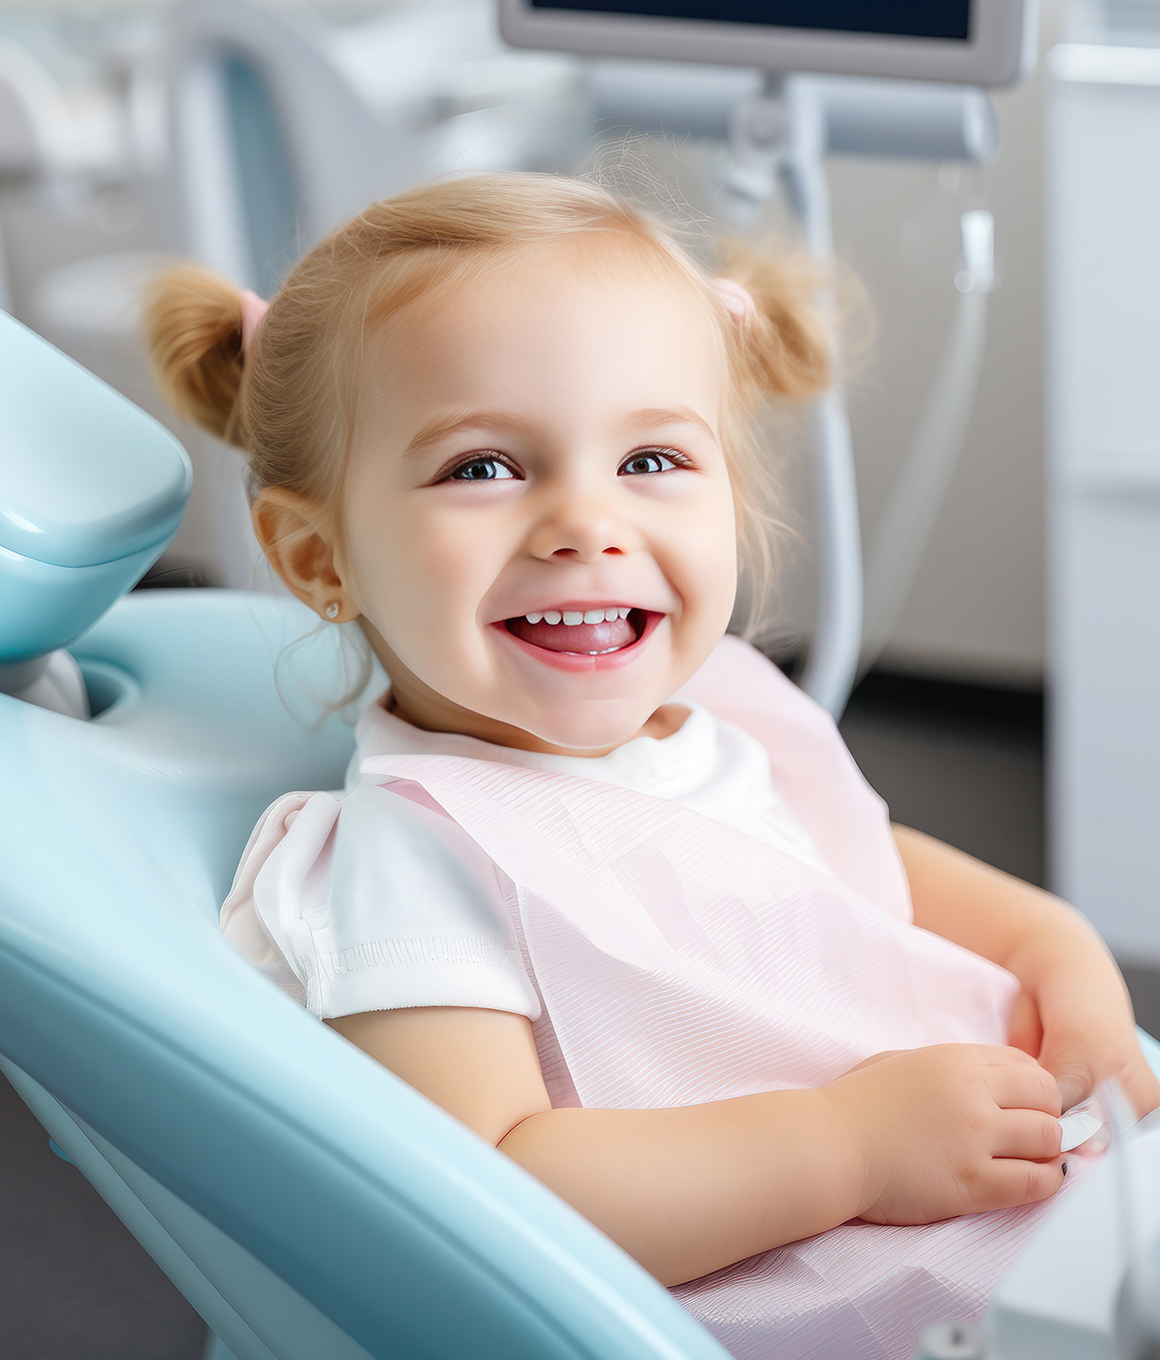 Young girl with pigtails smiling in dental chair